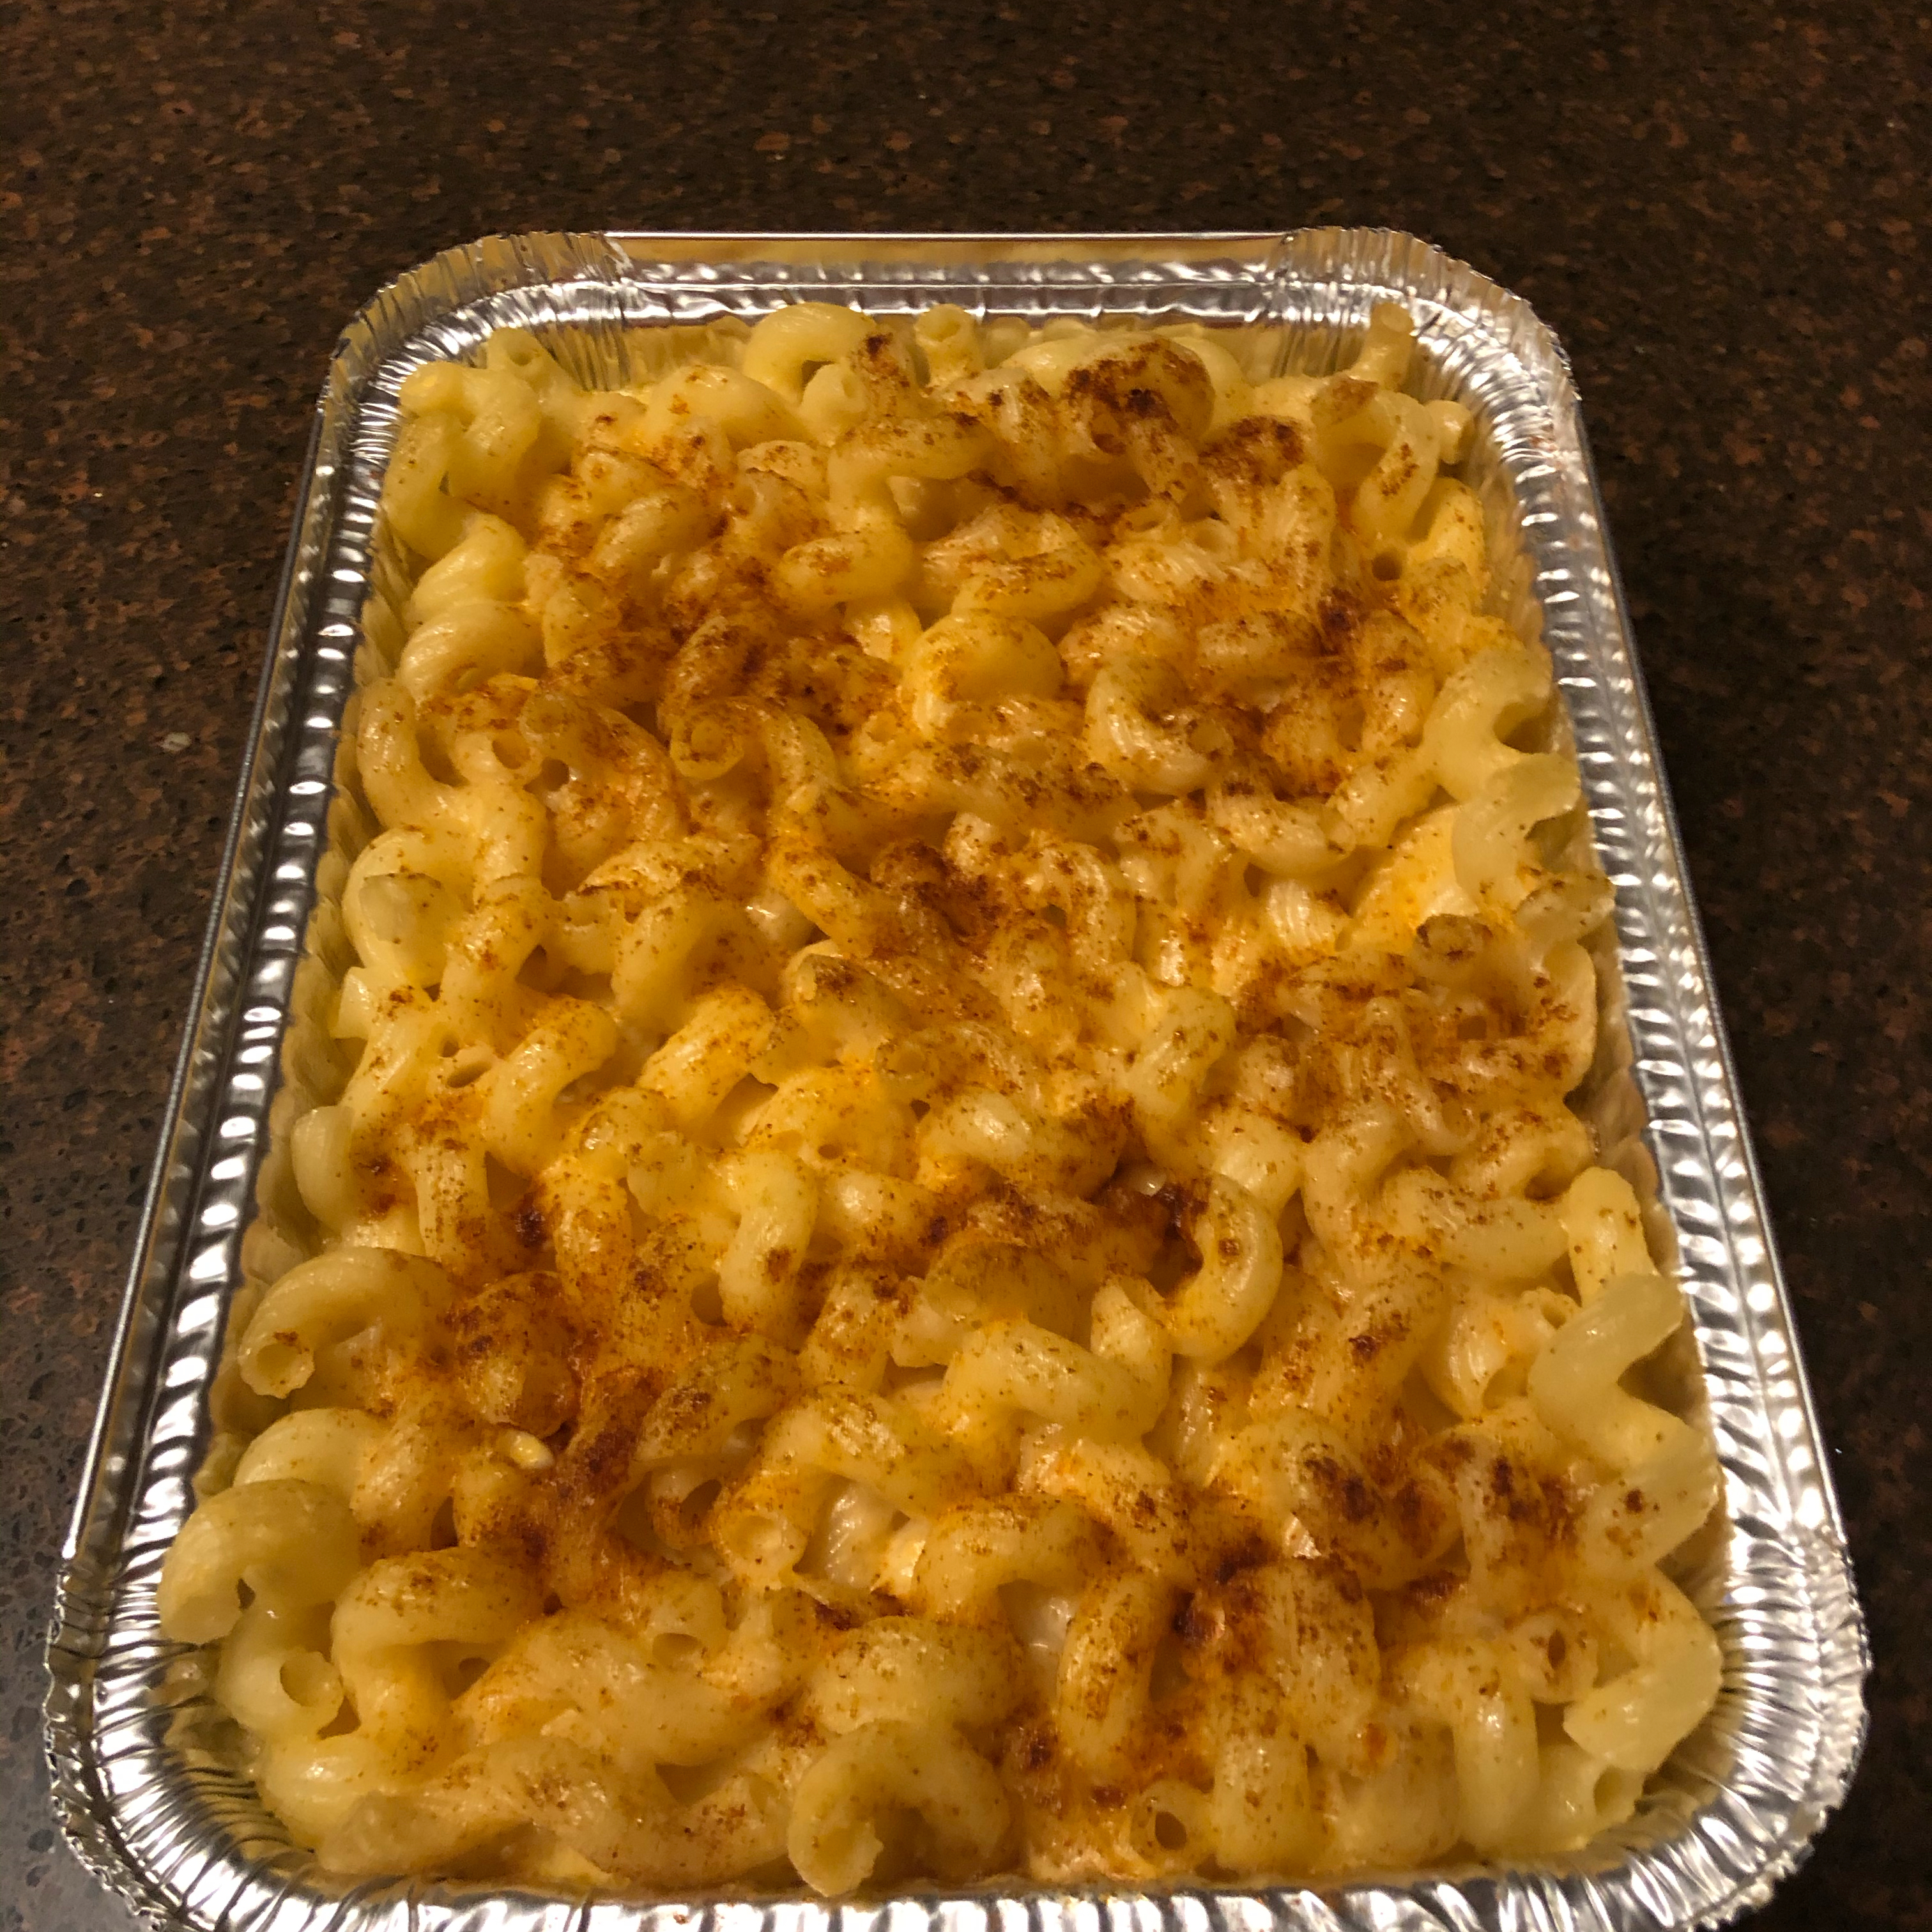 how many pounds of macroni for mac and cheese to feed 75 peole